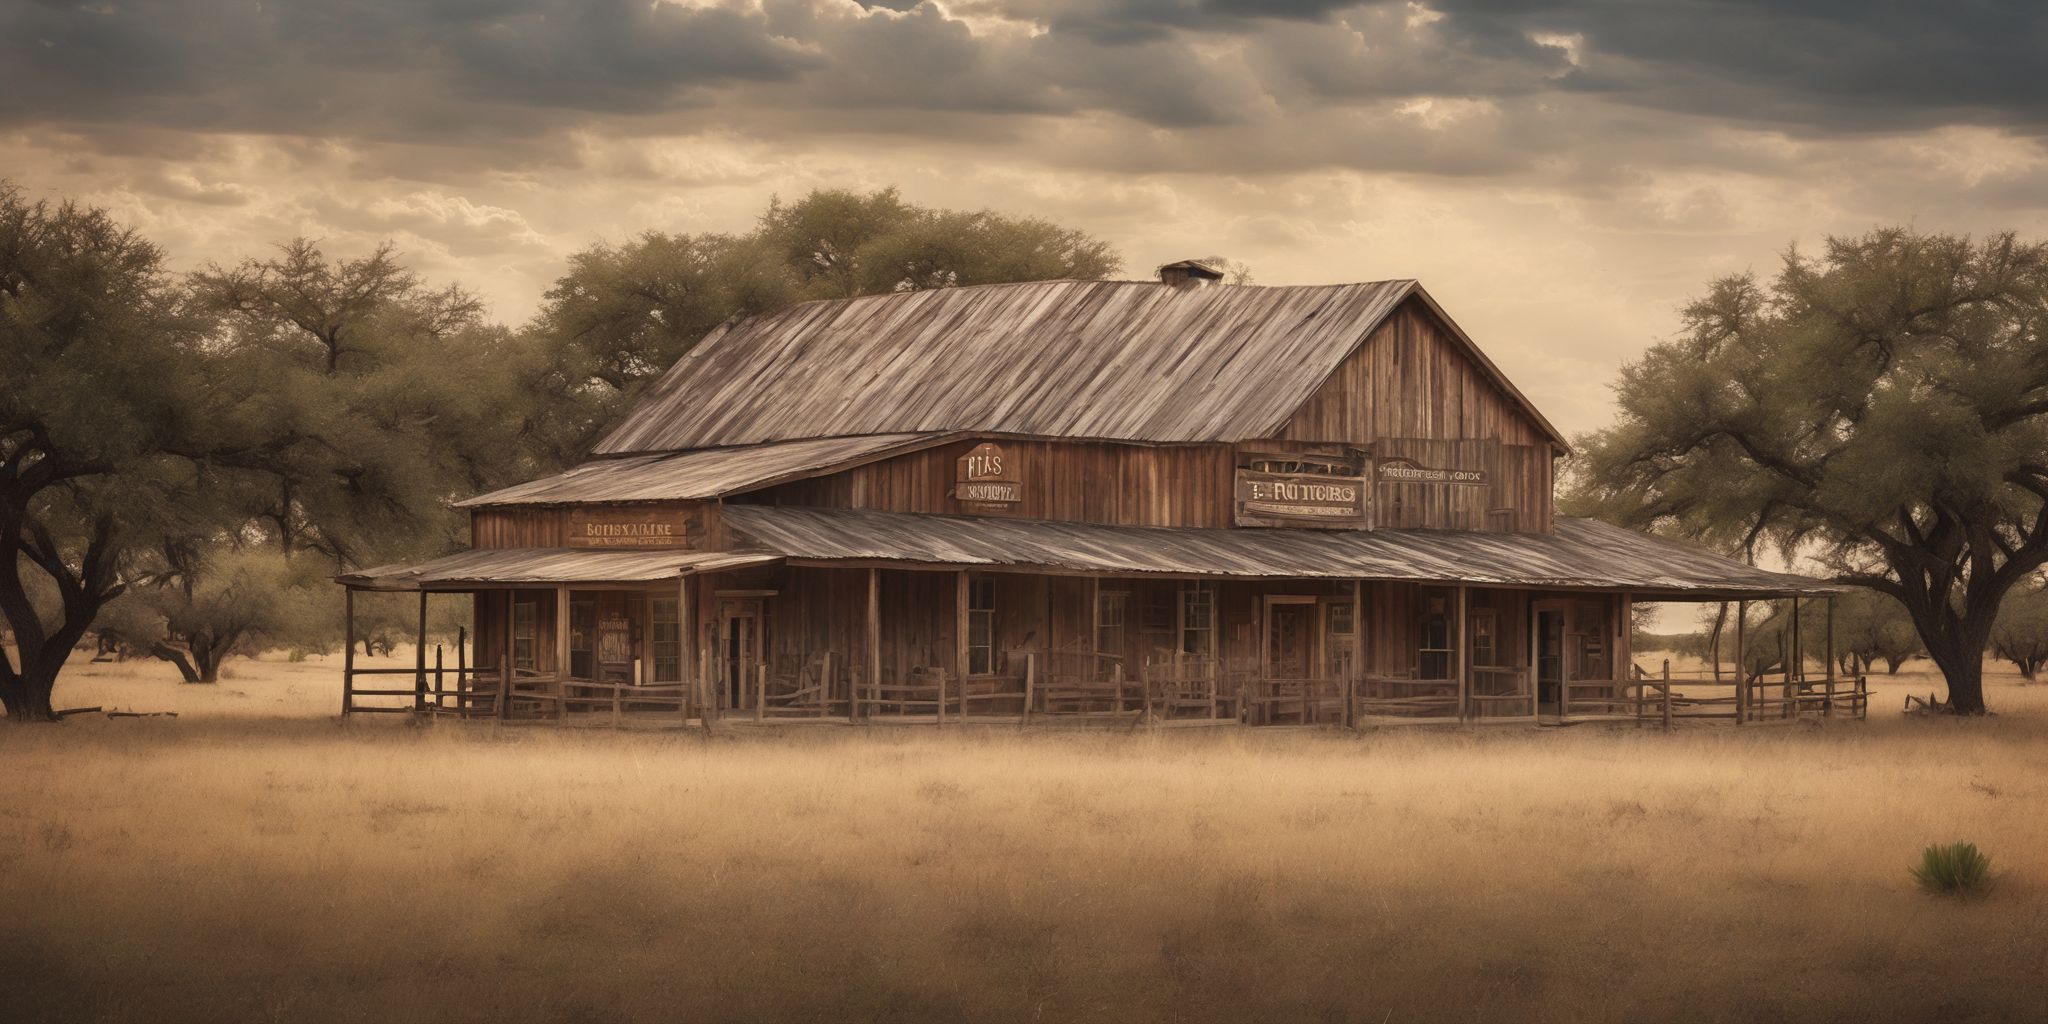 Credit Unions Texas: Ranch  in realistic, photographic style